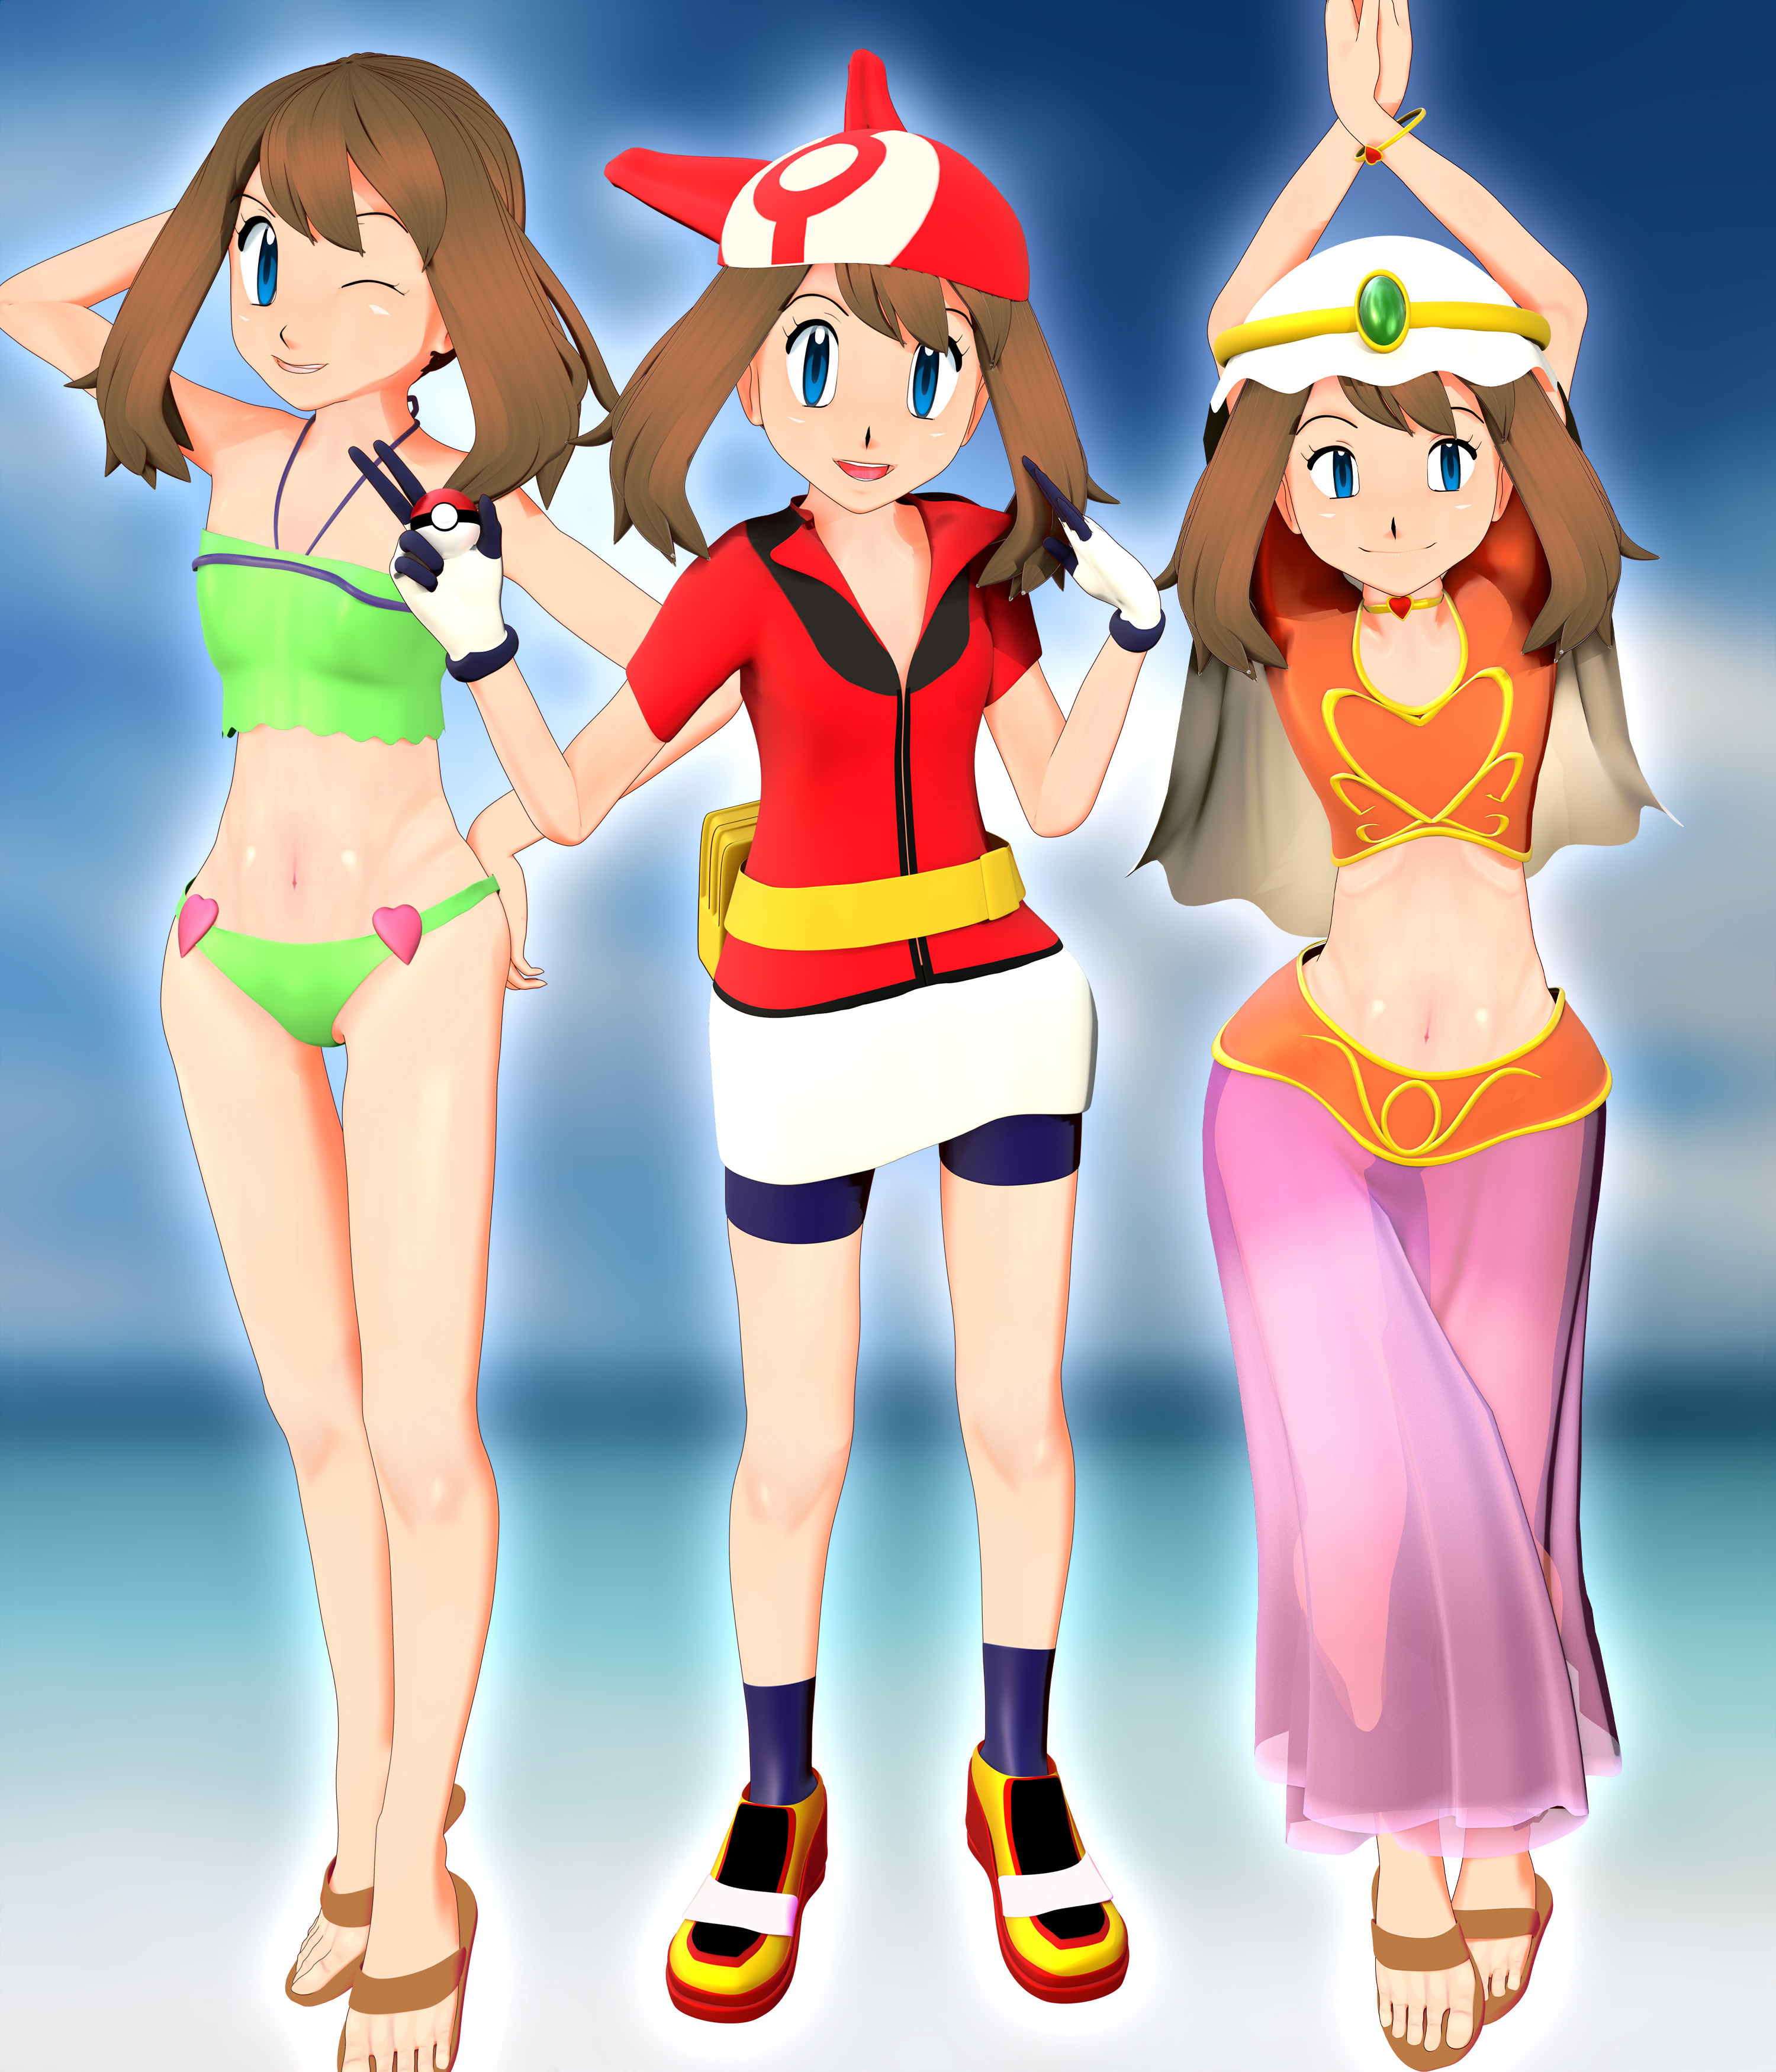 Outdated May Haruka From Pokemon Anime D Model By Banchouforte On Deviantart